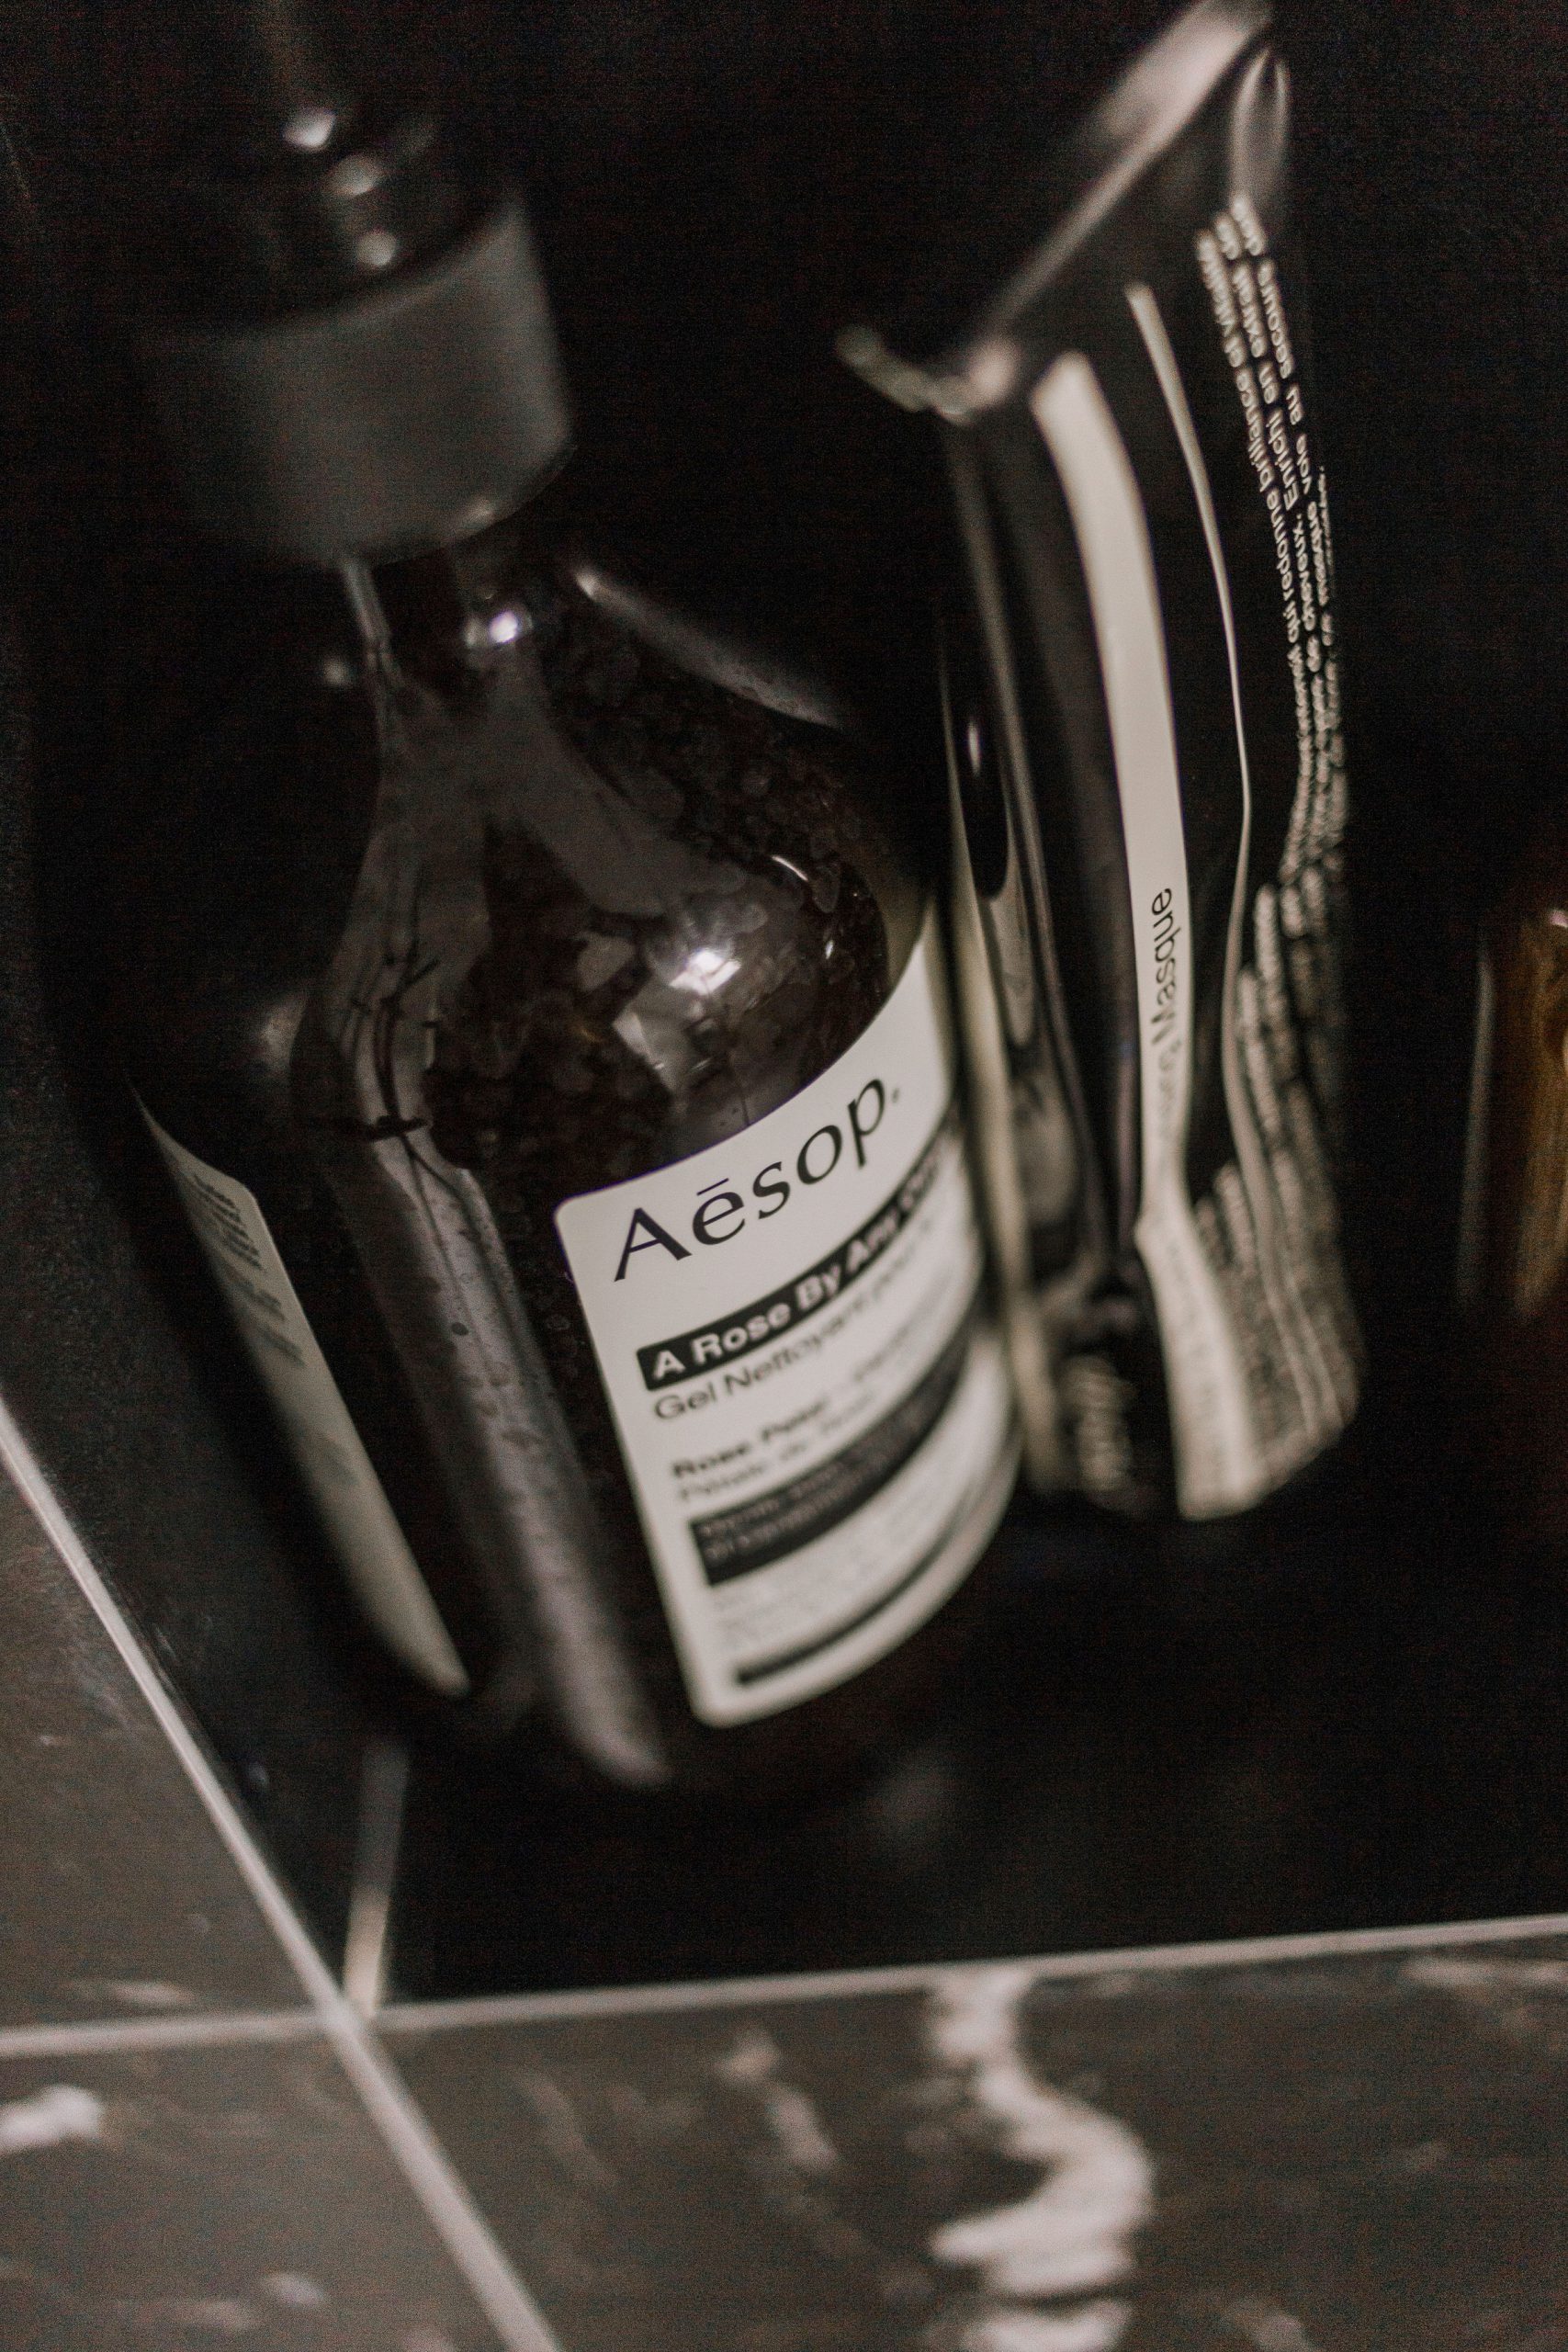 Aesop body cleanser A rose by any other name review